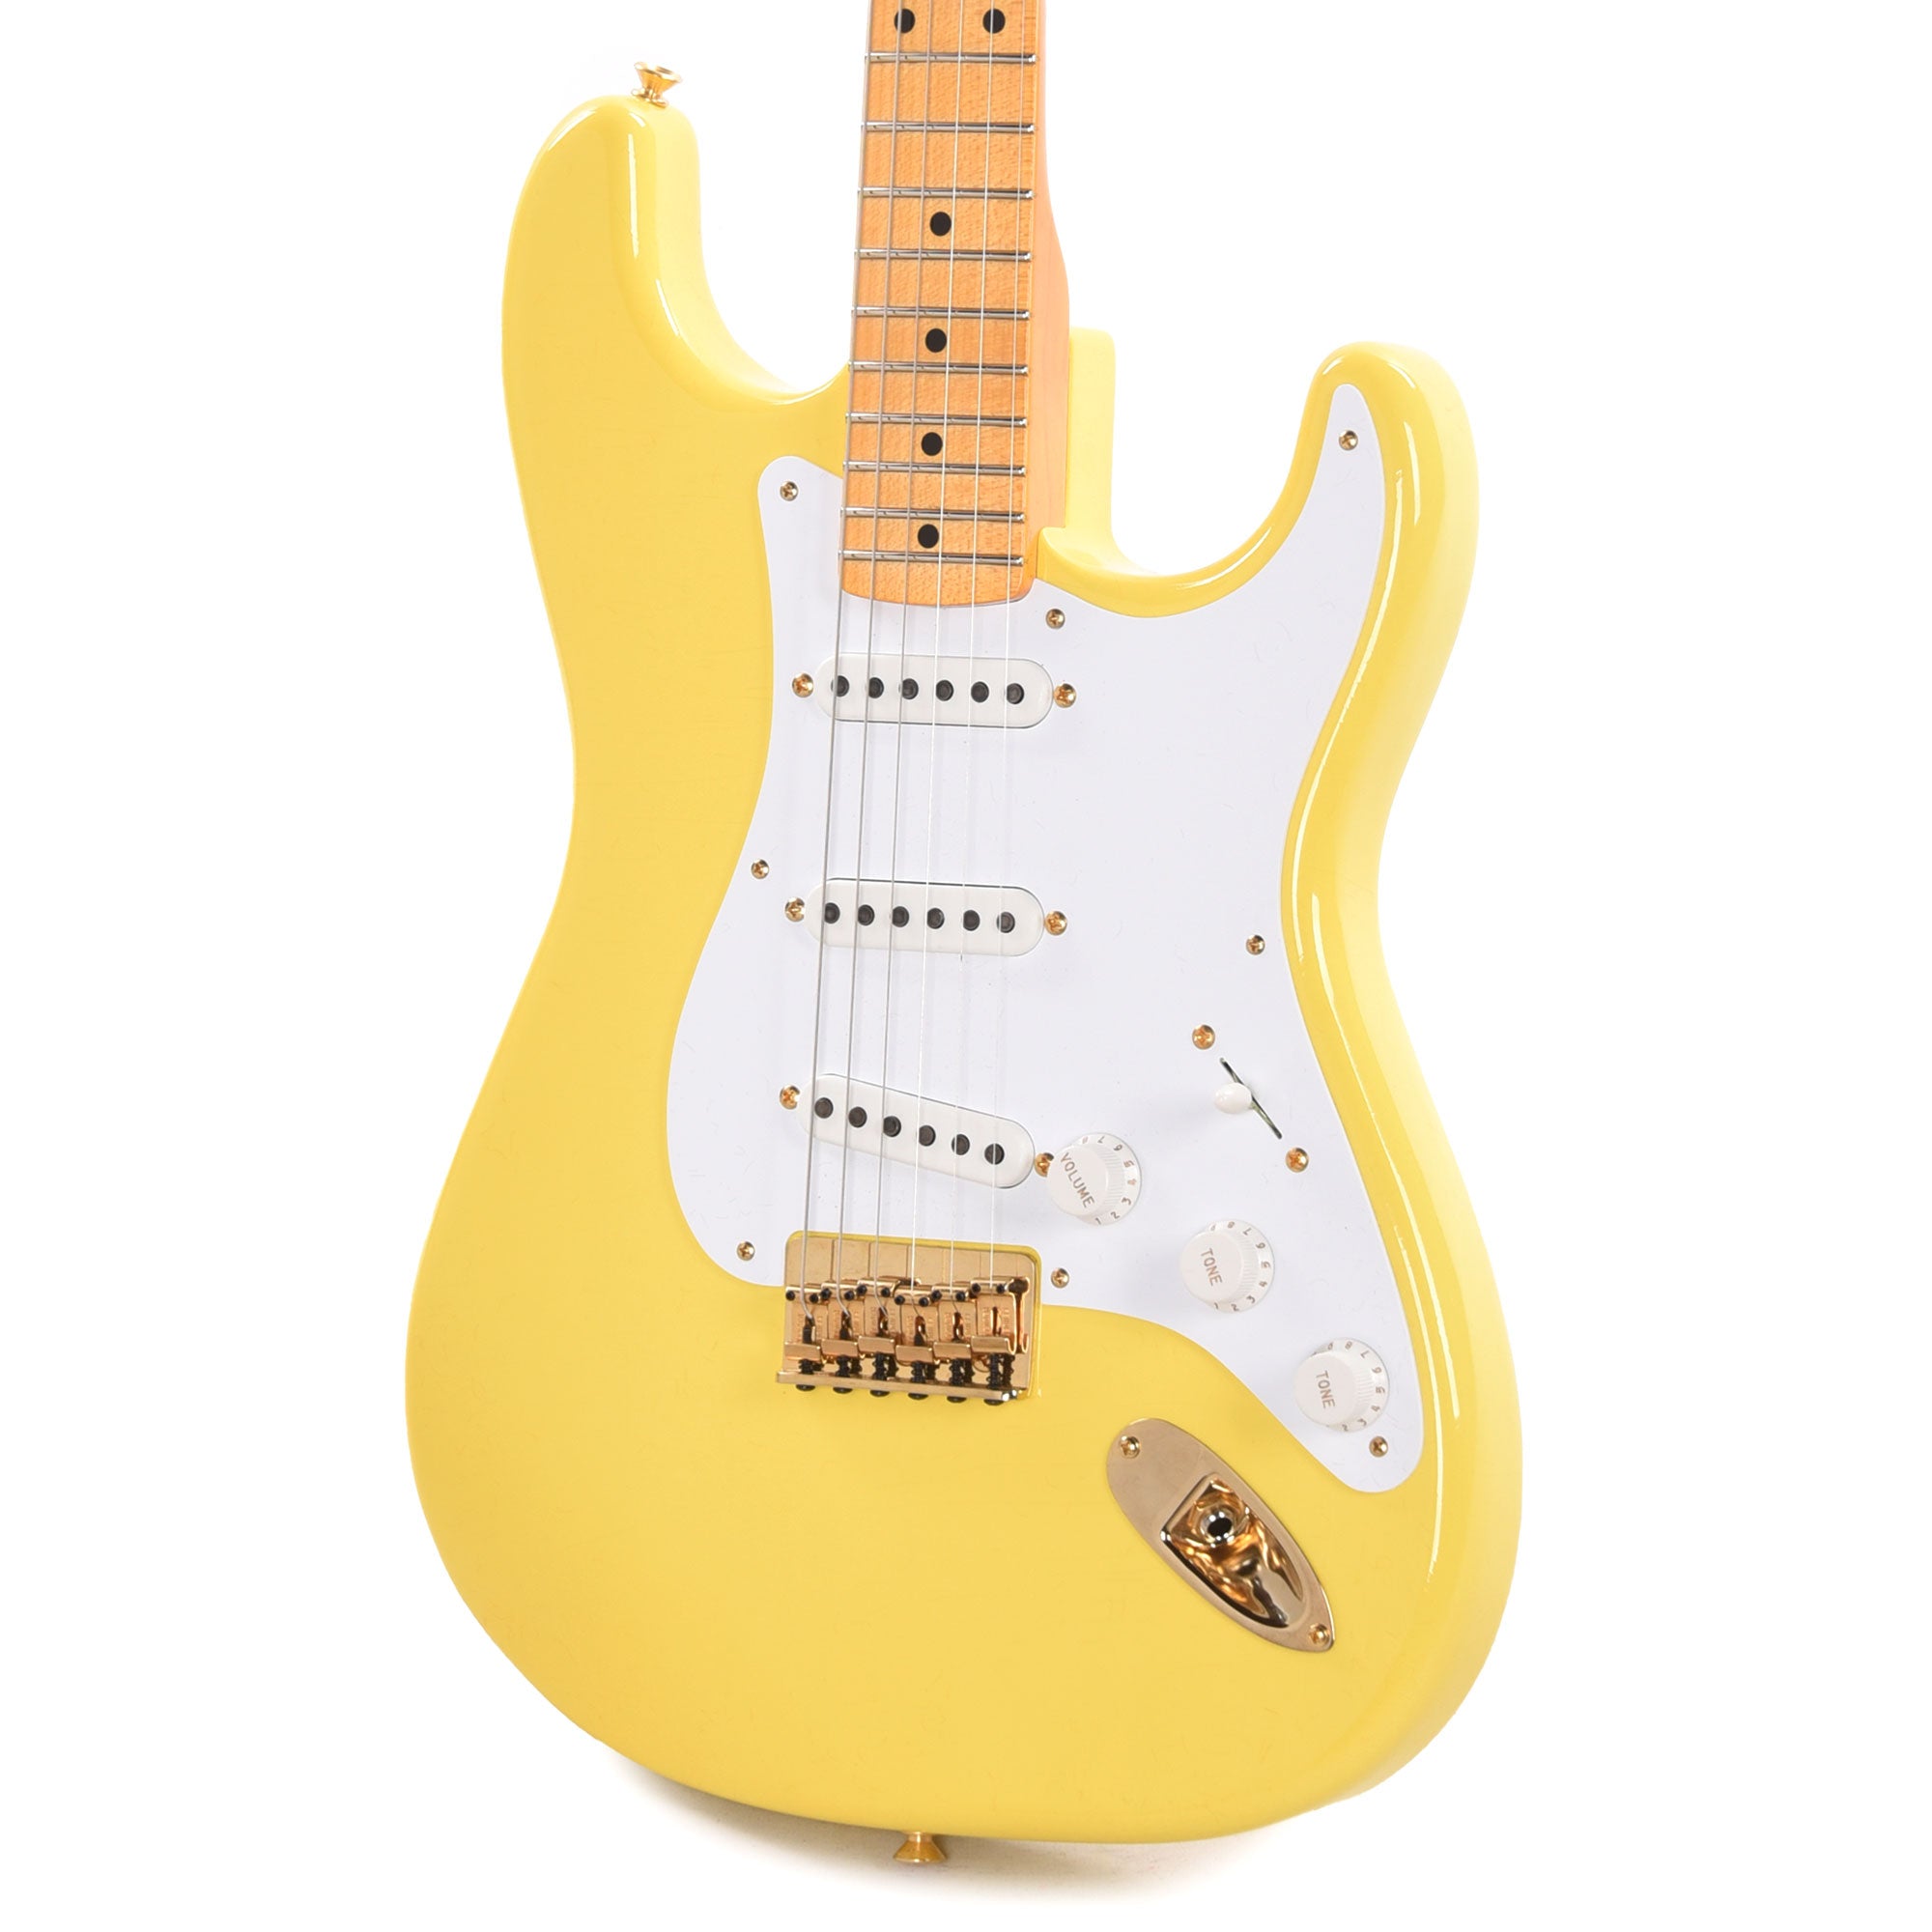 Fender Custom Shop Limited Edition '54 Hardtail Stratocaster Deluxe Closet Classic with Gold Hardware Faded Aged Canary Yellow